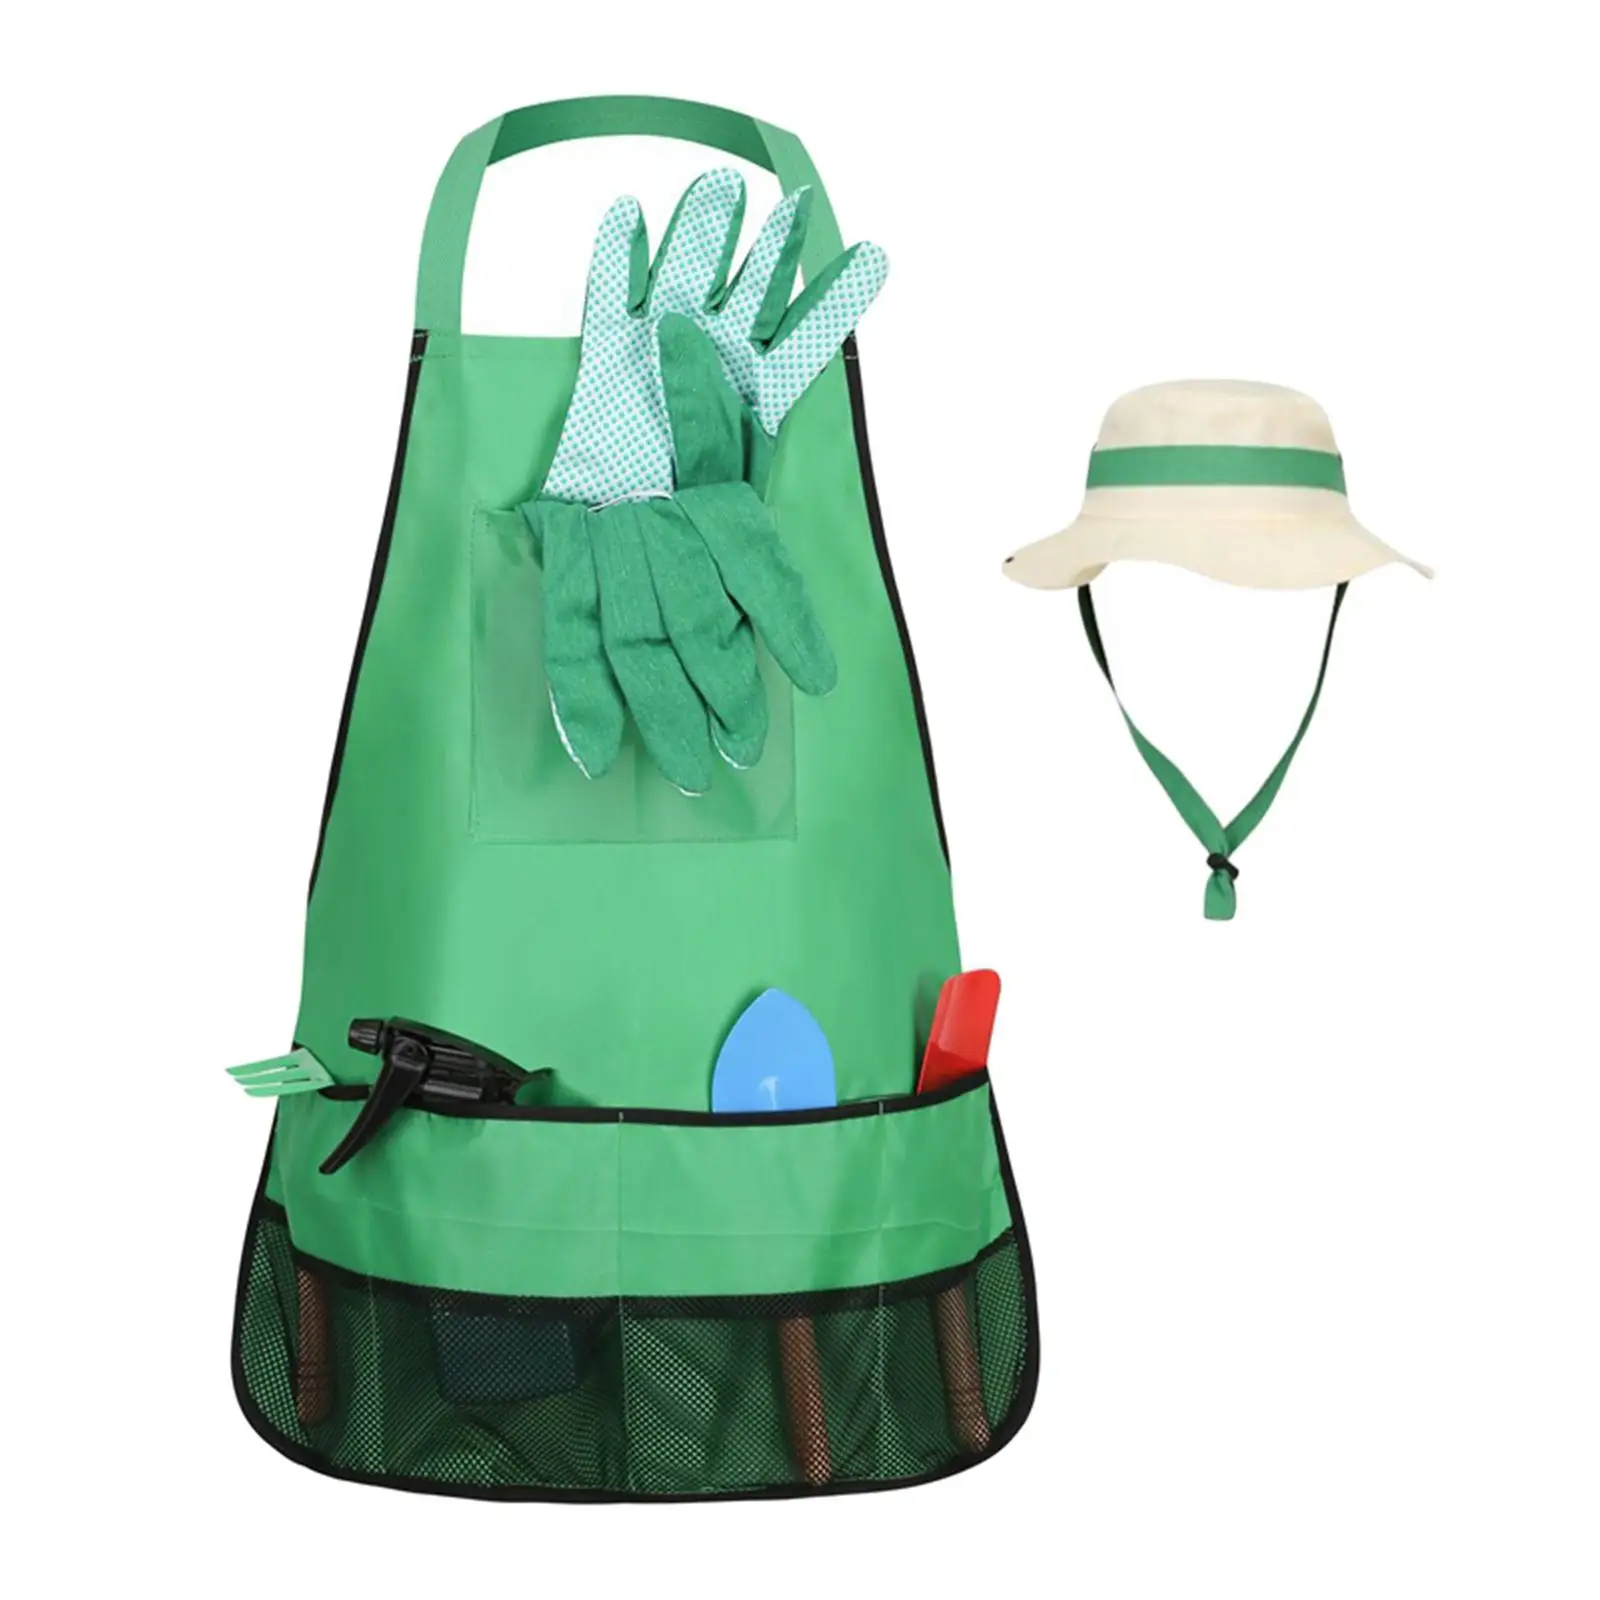 Mini Spade Gloves Apron Garden Pretend Toy Early Learning Role Playing Toddlers Gardening Tool Kits for Kindergarten Boys Girls